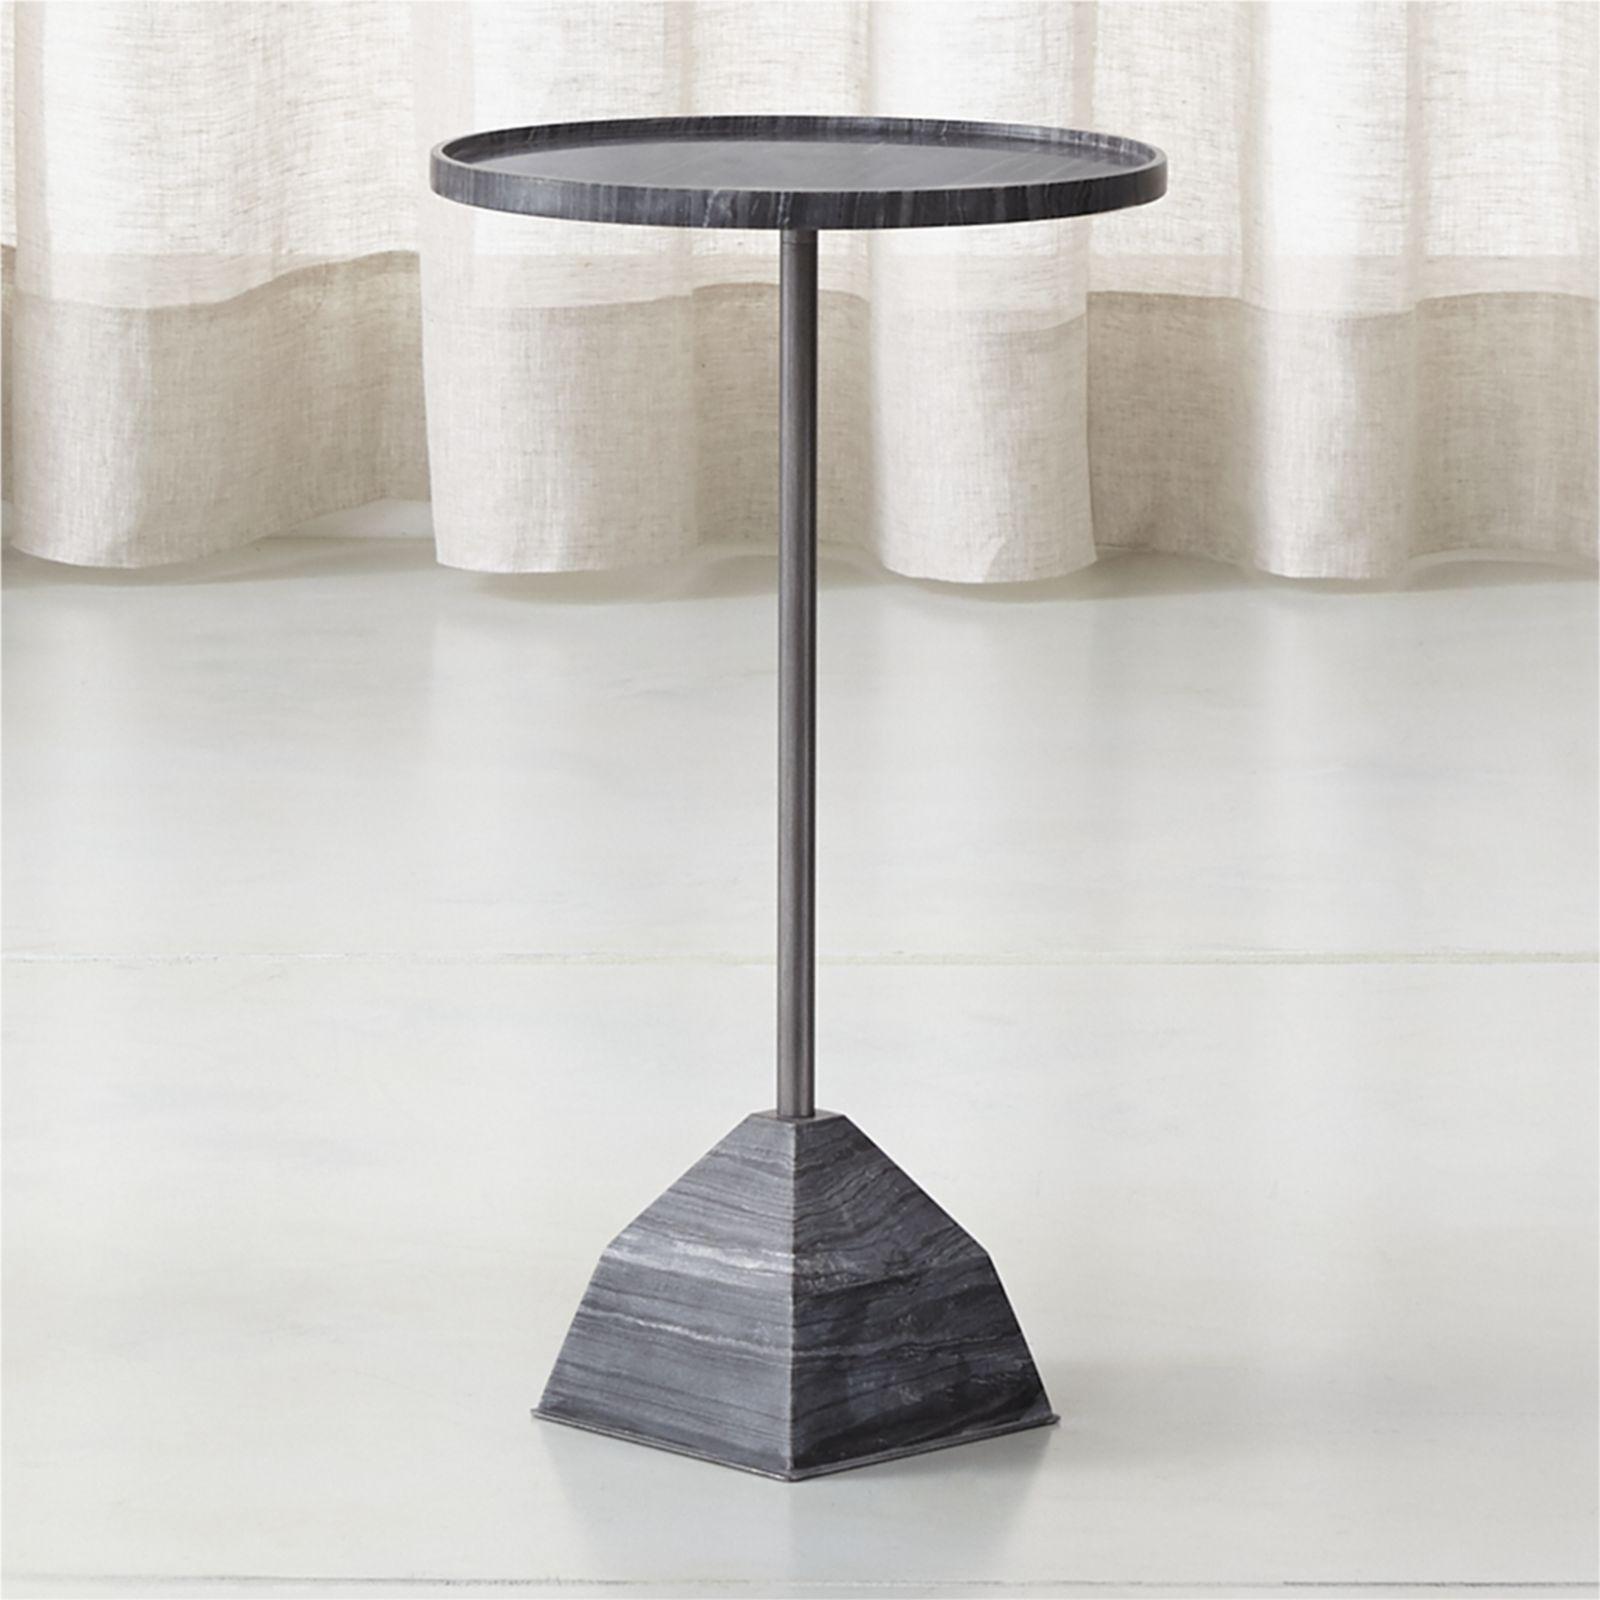 Prost Tall Brass and Marble Round Drink Table + Reviews